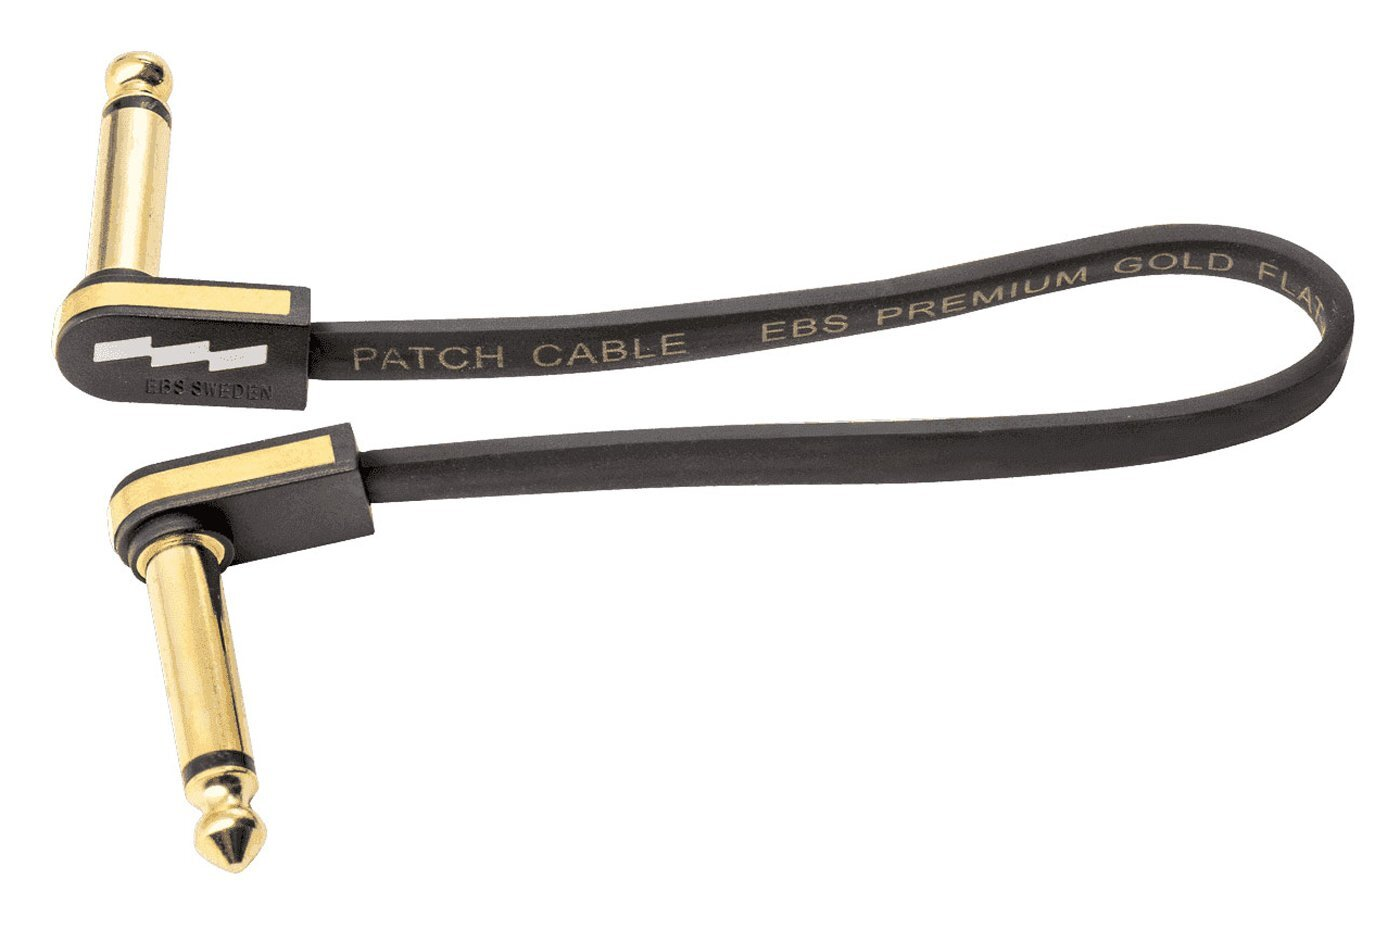 EBS 18CM GOLD PLATED PREMIUM PATCH CABLE